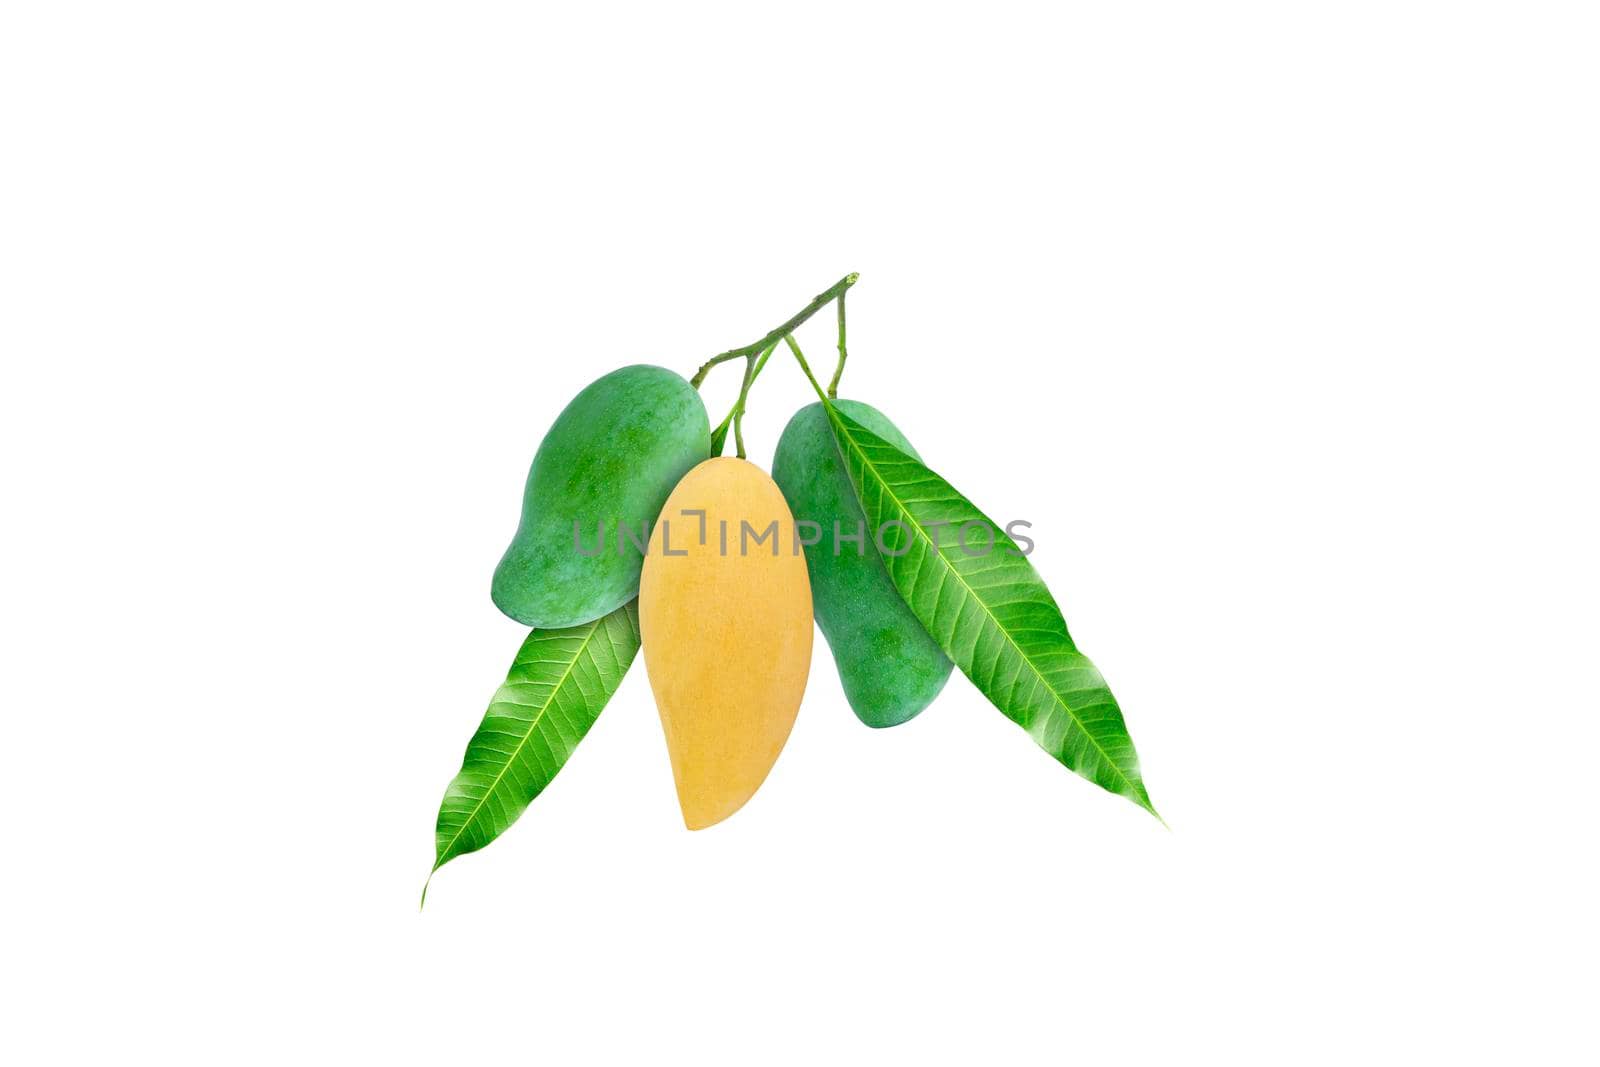 Single yellow ripe mango Between the green raw mango and the green leaves the same branch on a white background.